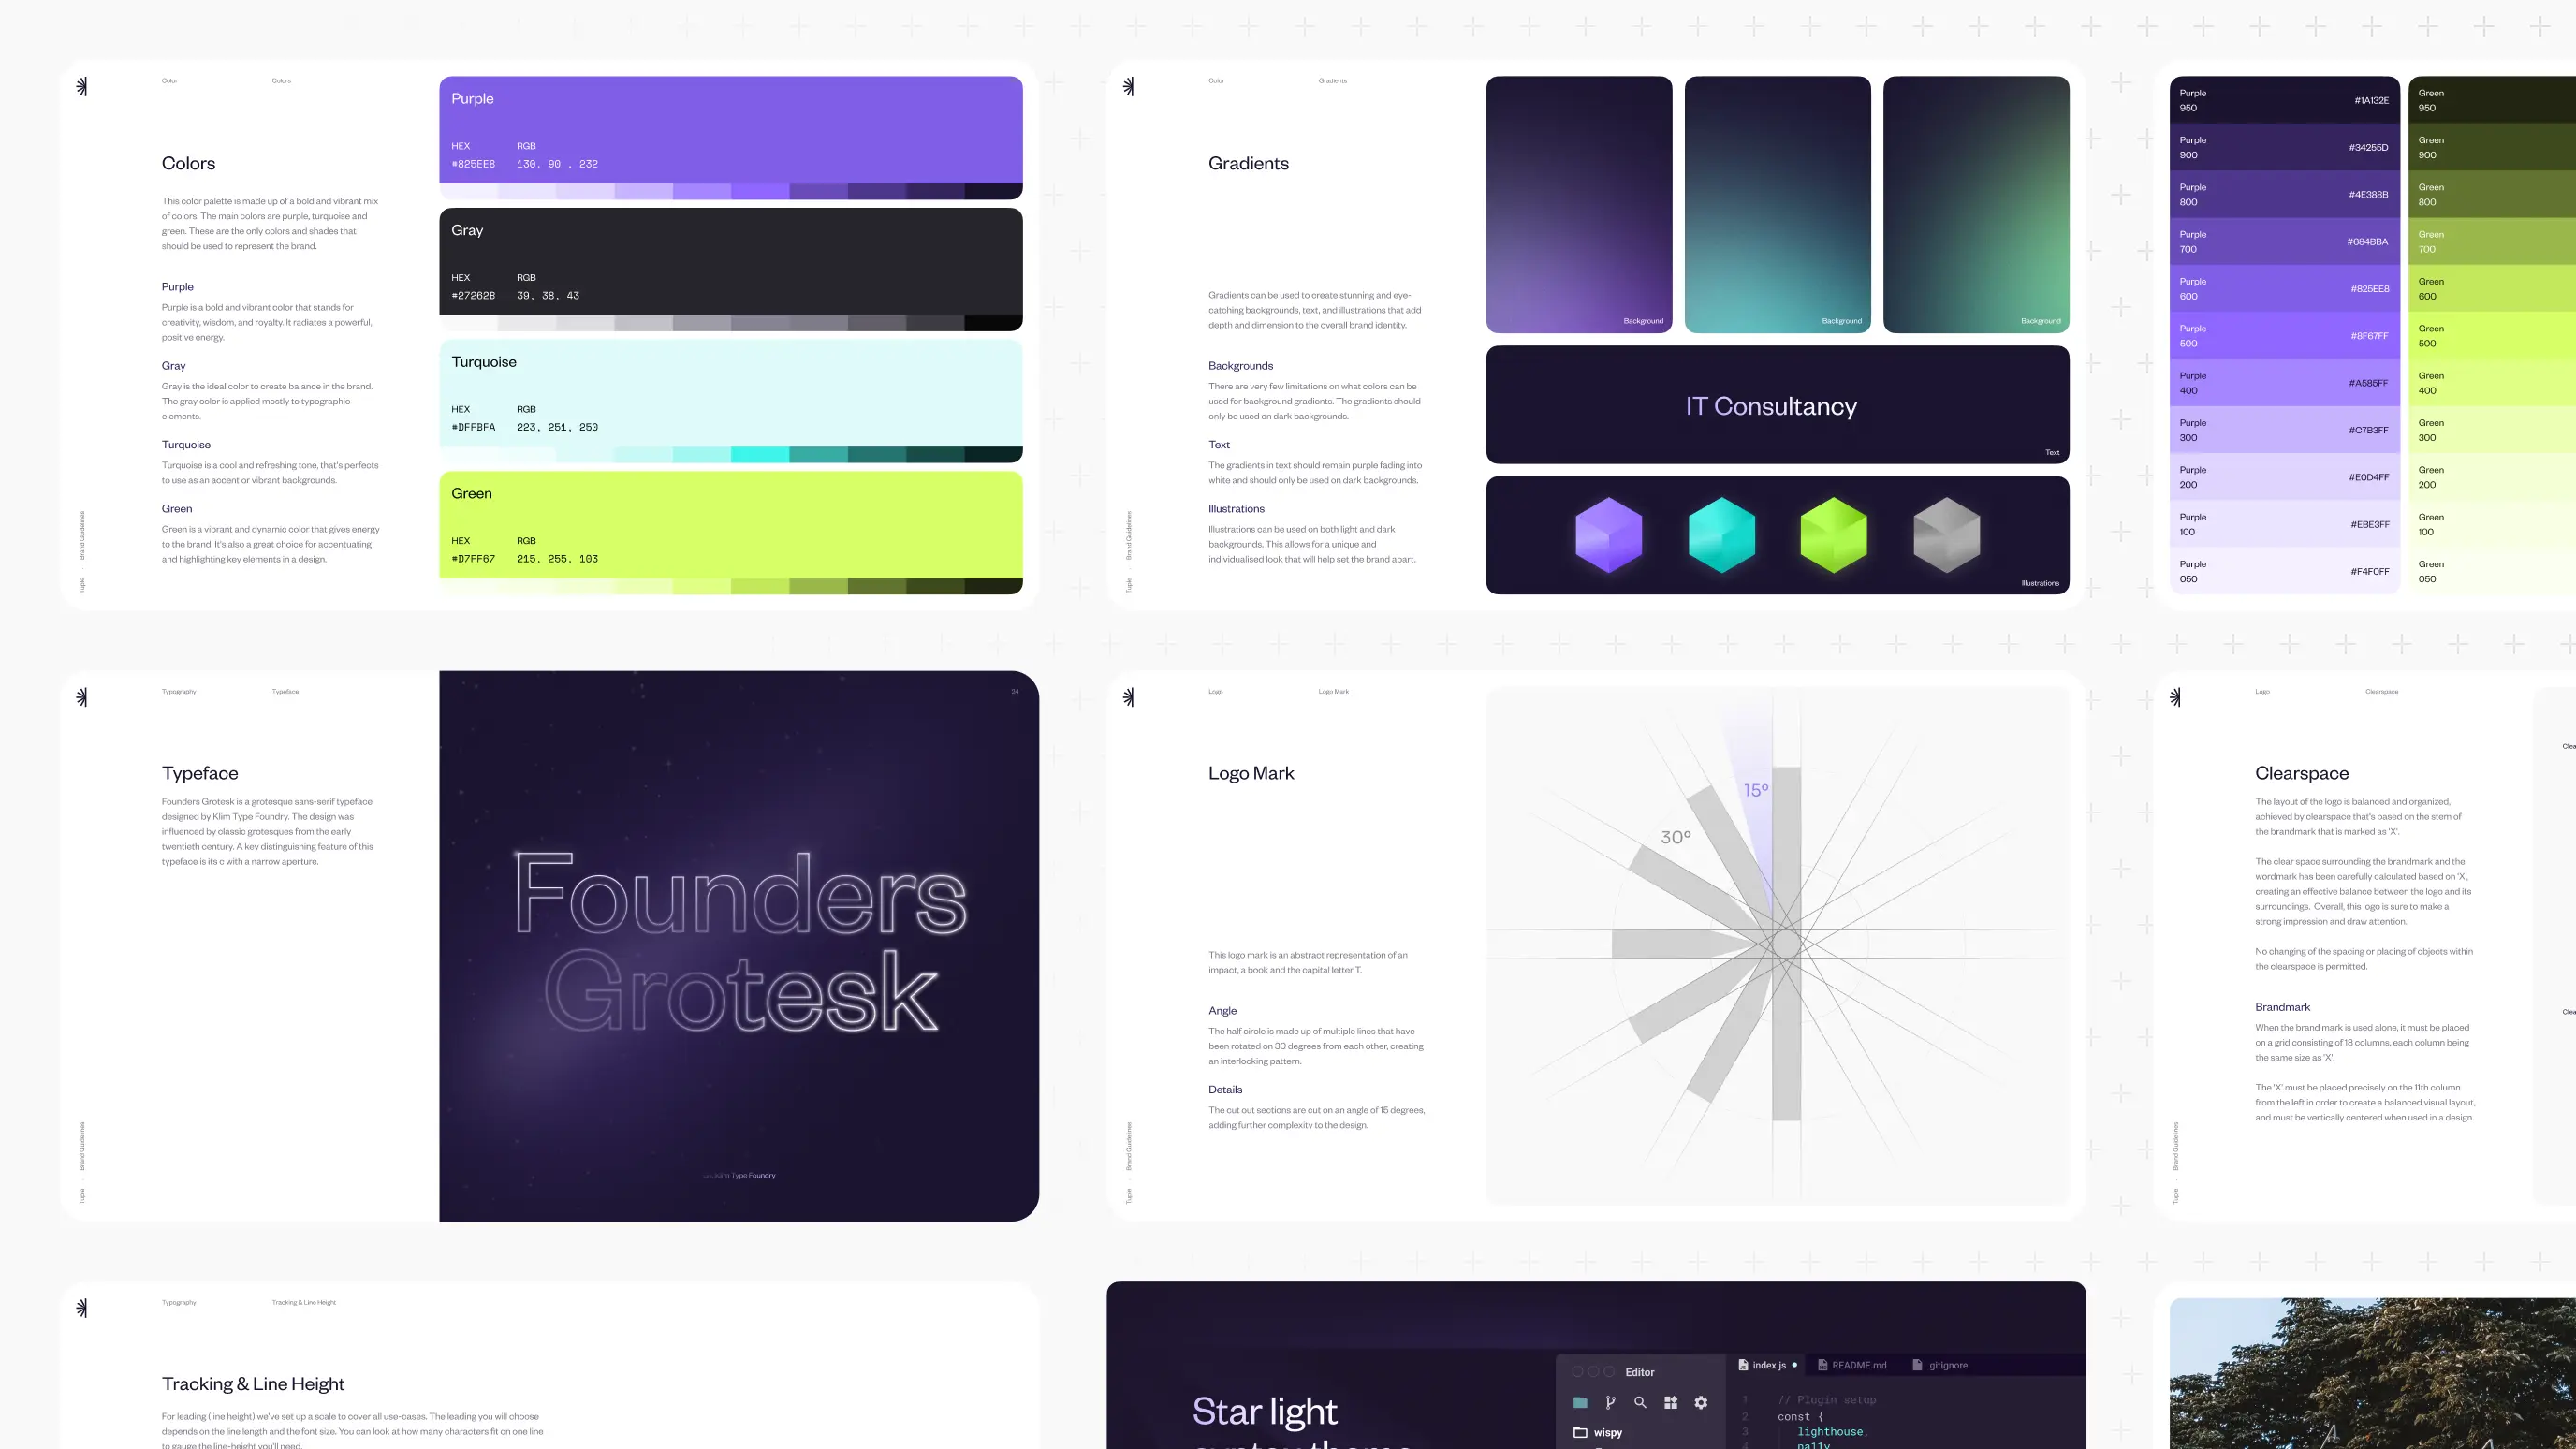 Image with nine rounded rectangles that displays some slides from the Brand Identity Guidelines we've made for Tuple